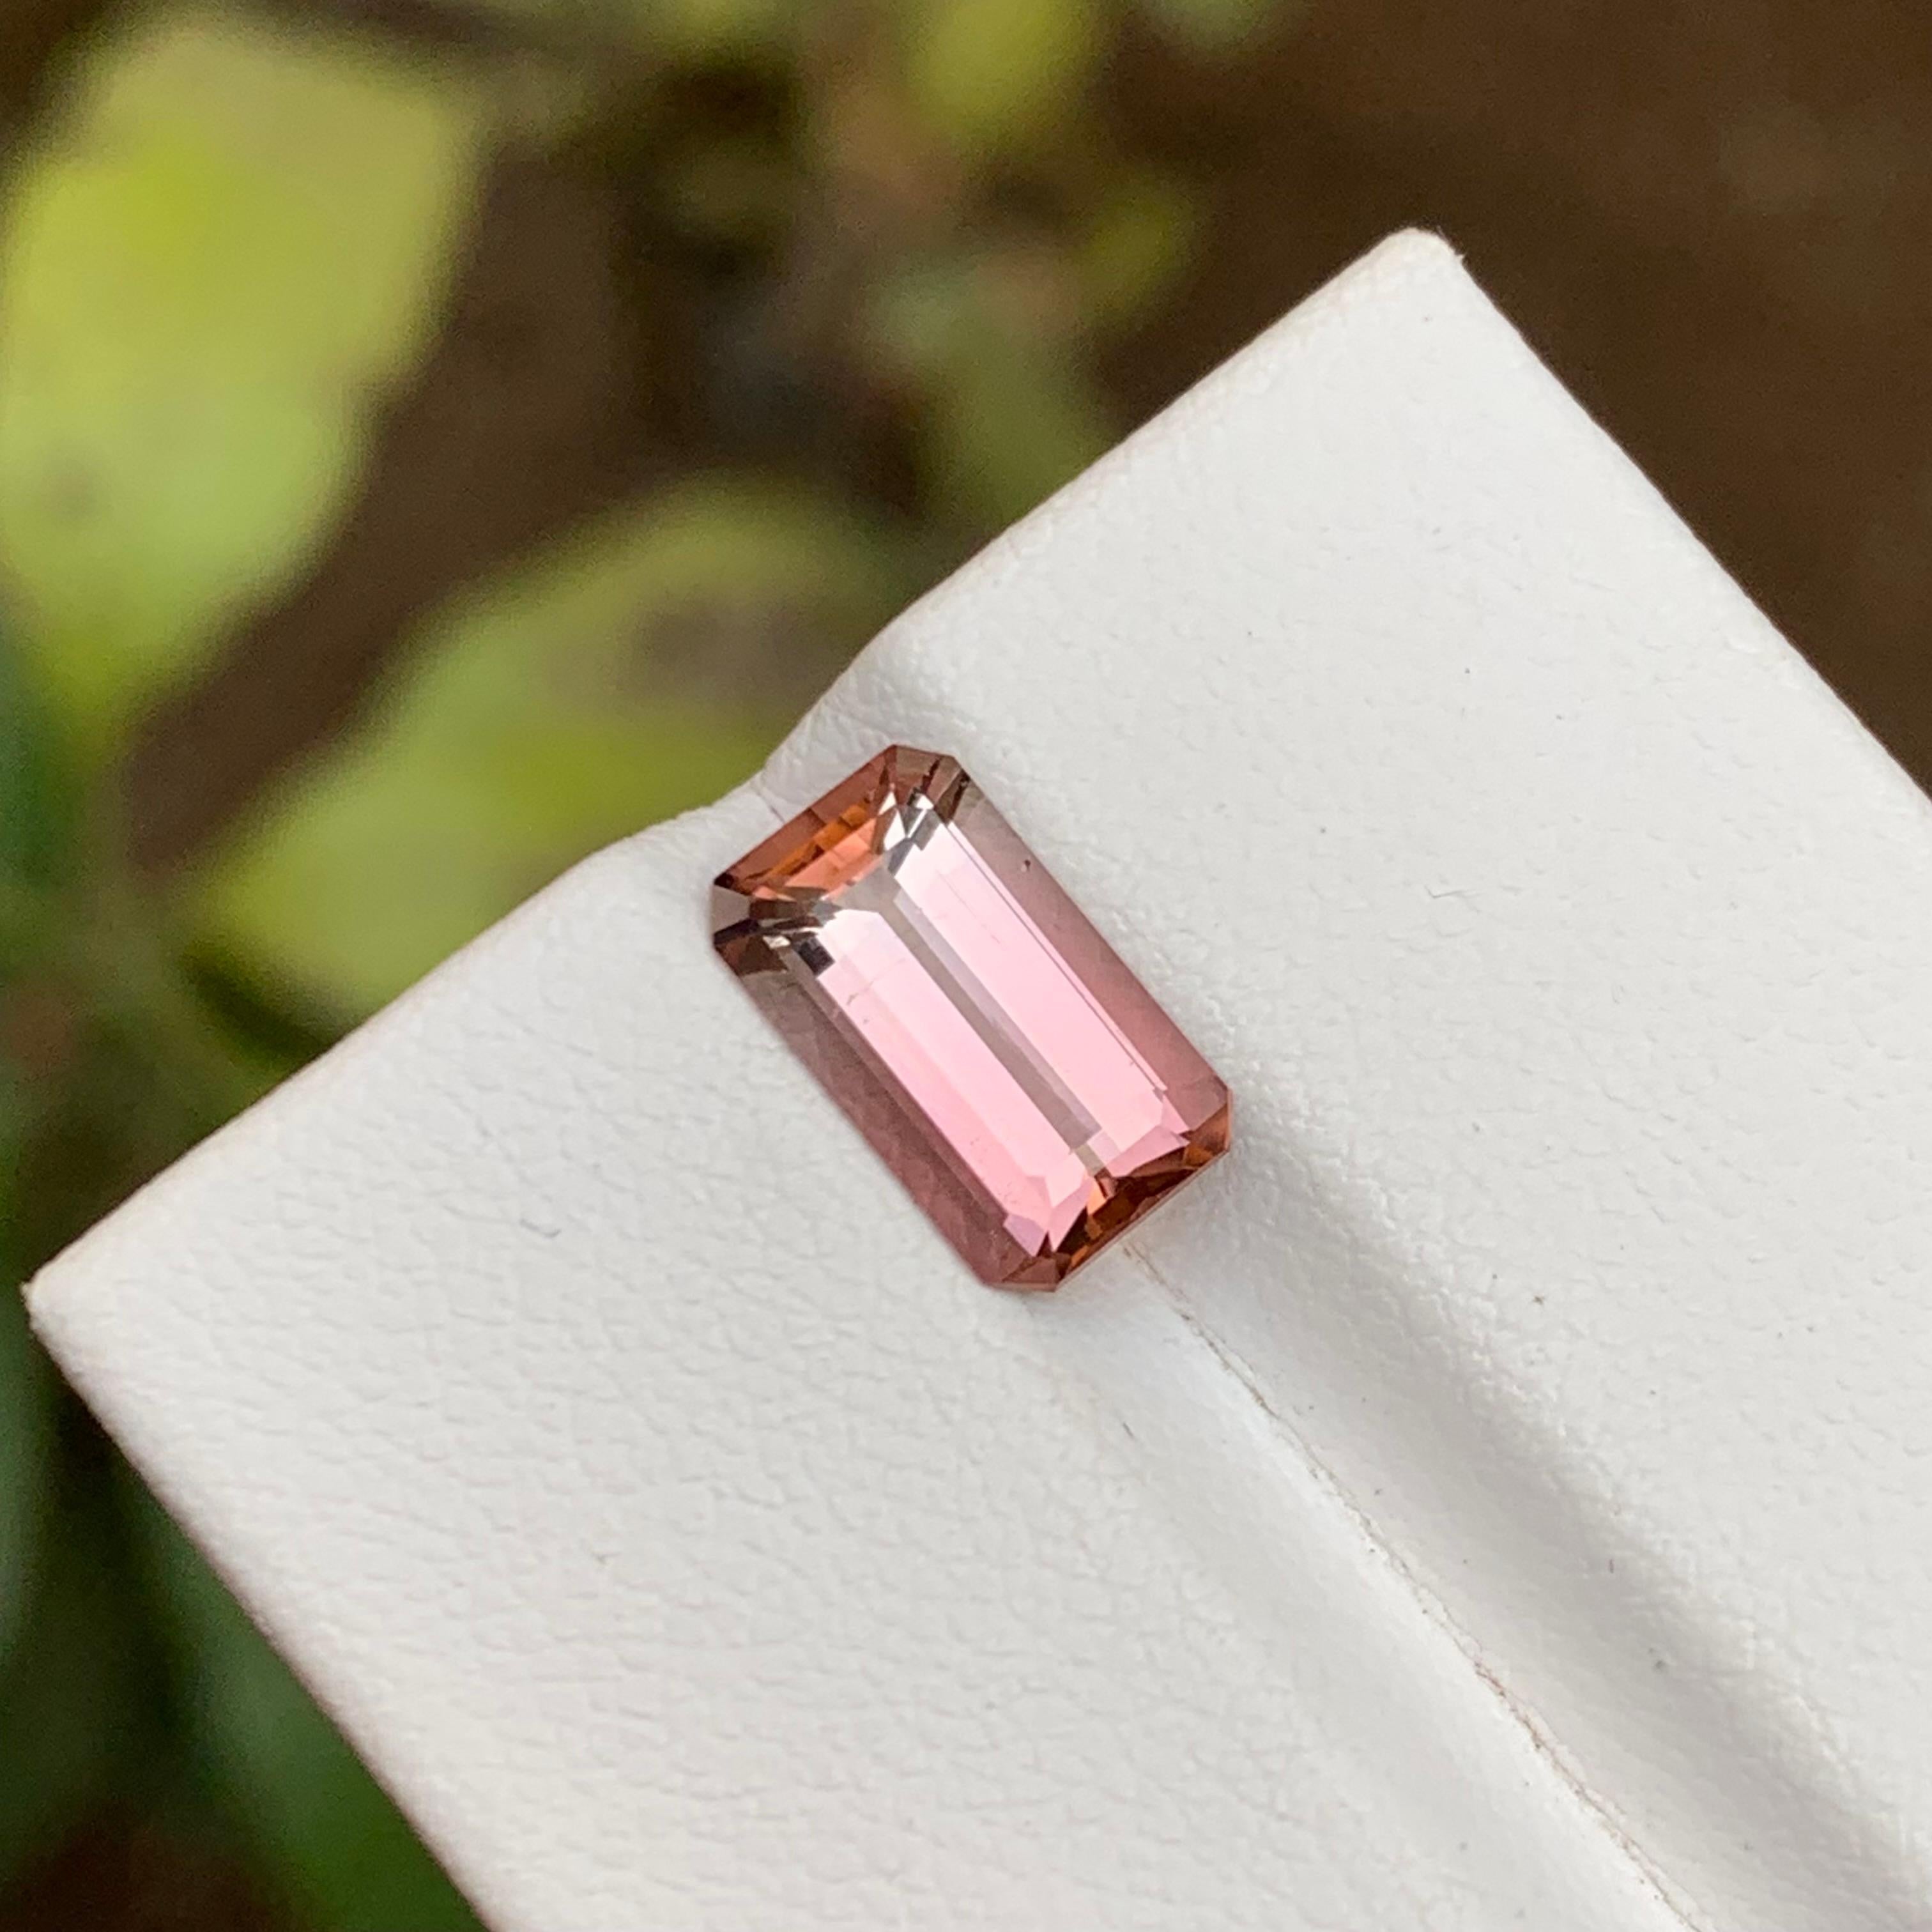 Rare Pink Natural Tourmaline Loose Gemstone 2.45 Ct Emerald Cut for Ring/Pendant For Sale 5